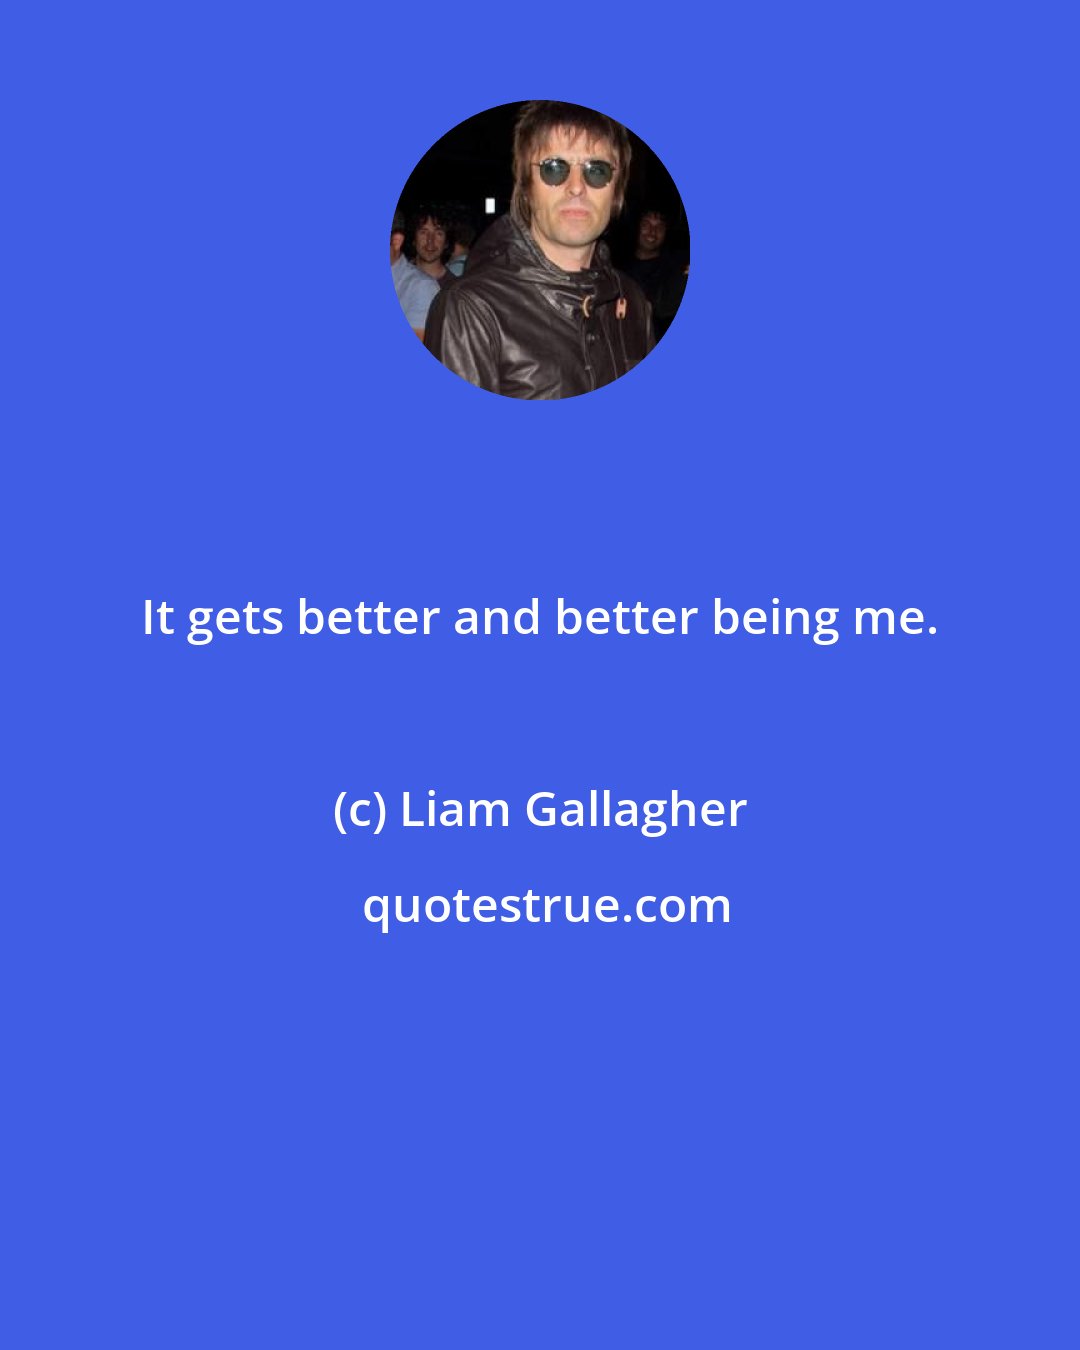 Liam Gallagher: It gets better and better being me.